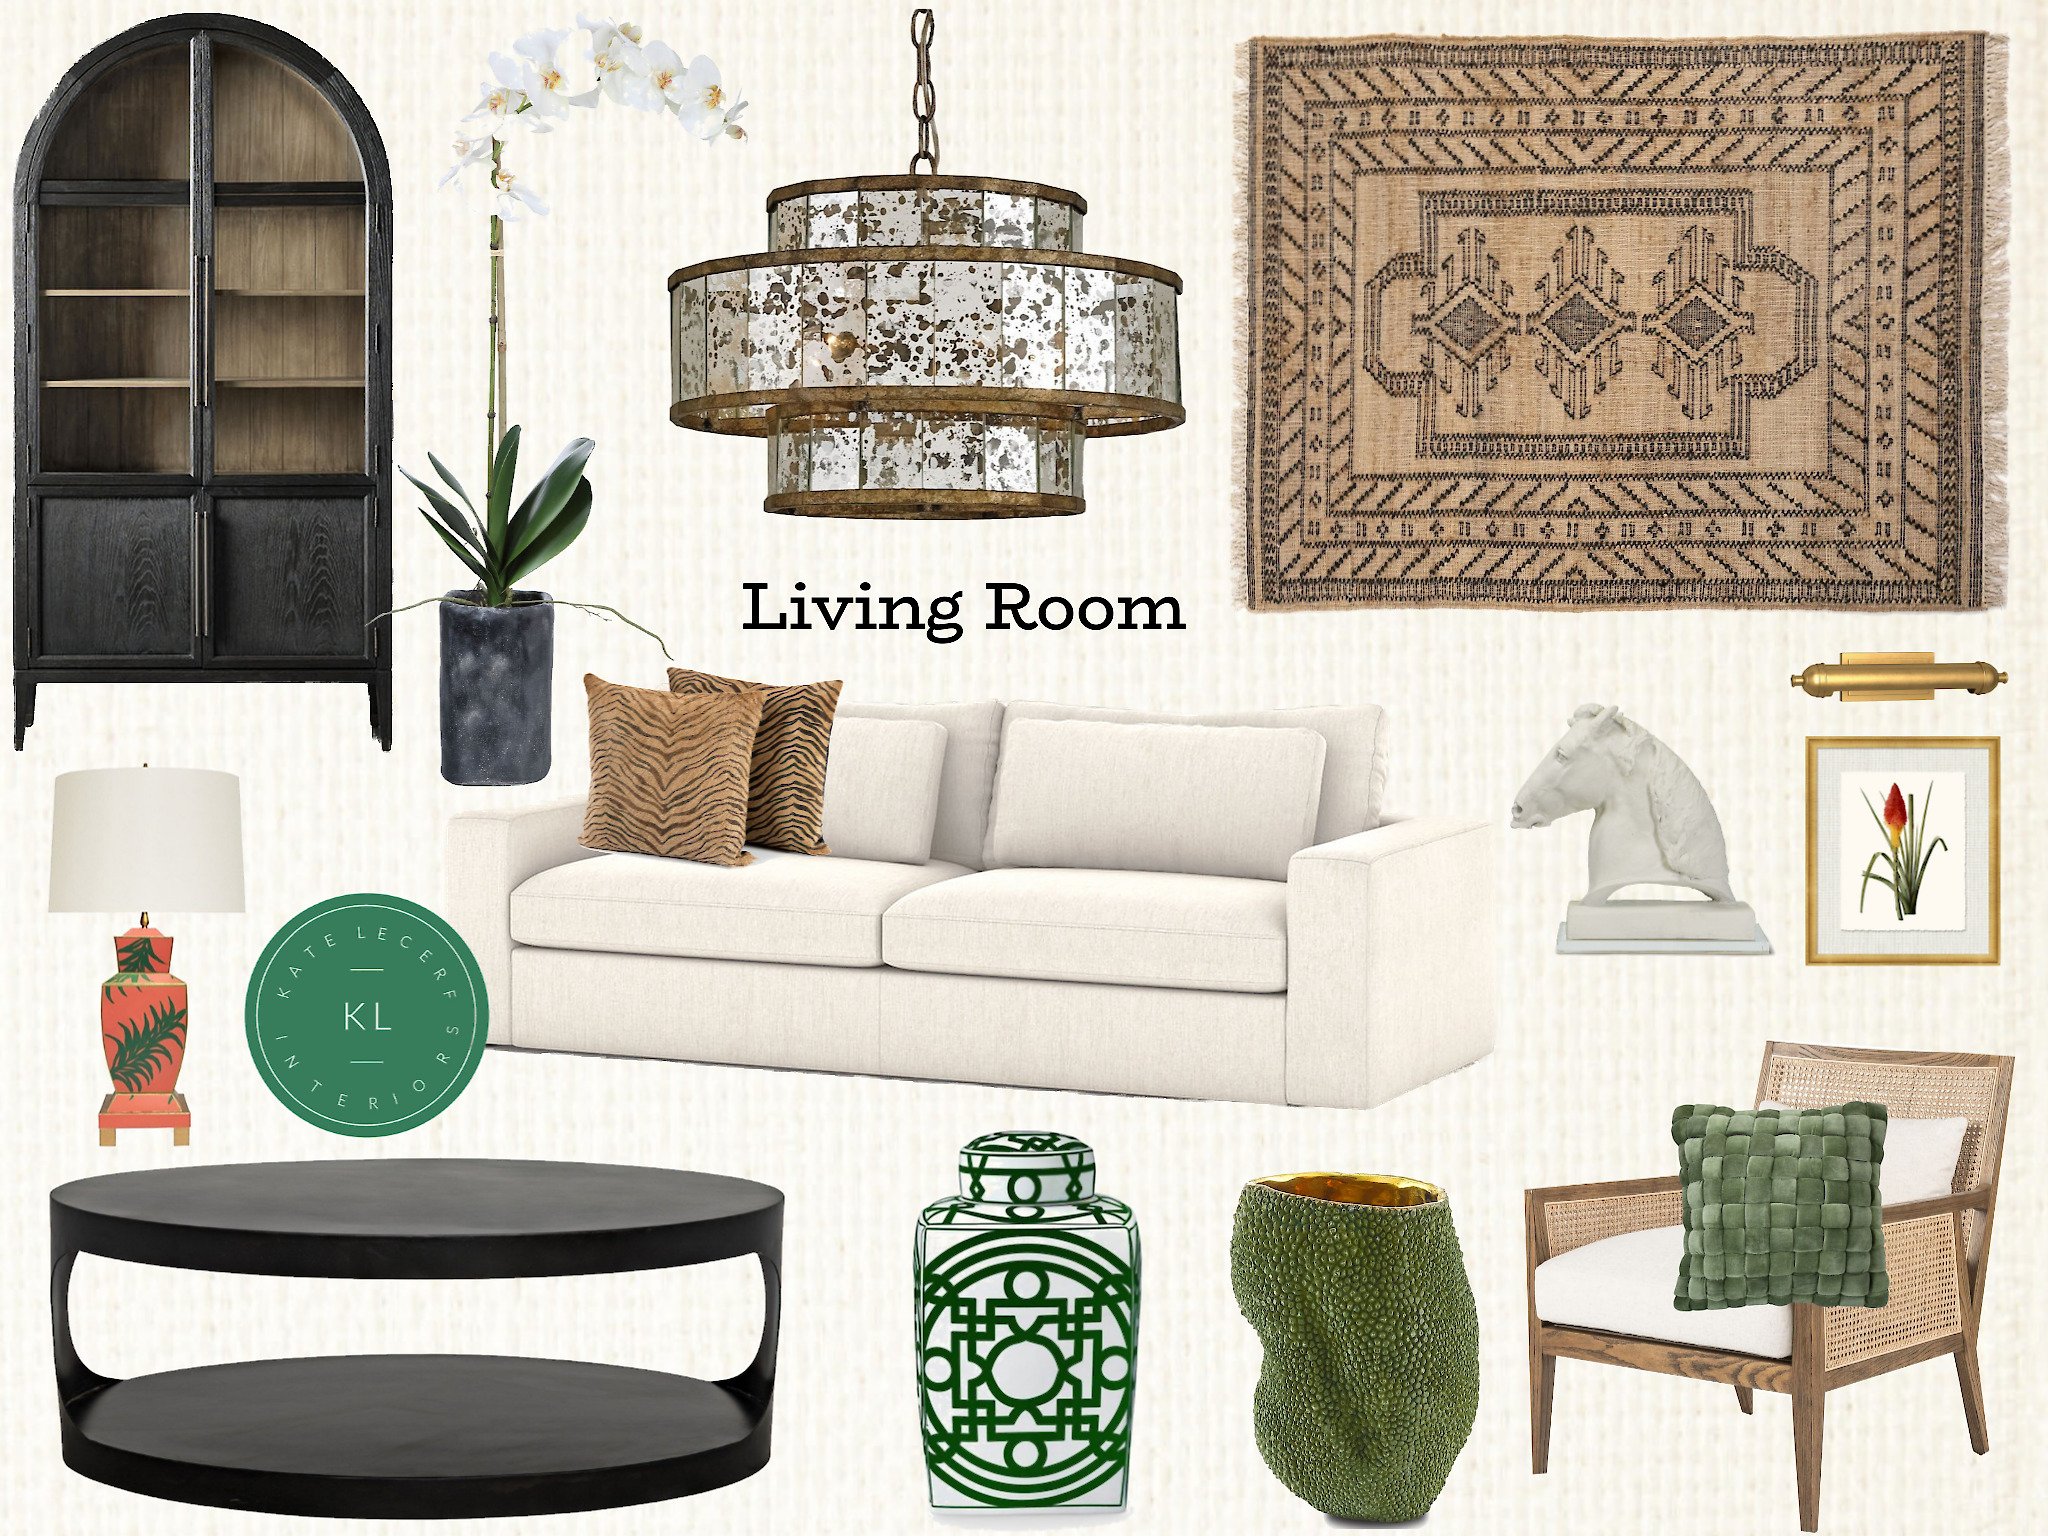  Living room white sofa neutral home decor black coffee table rattan chair black arched cabinet mercury glass chandelier 